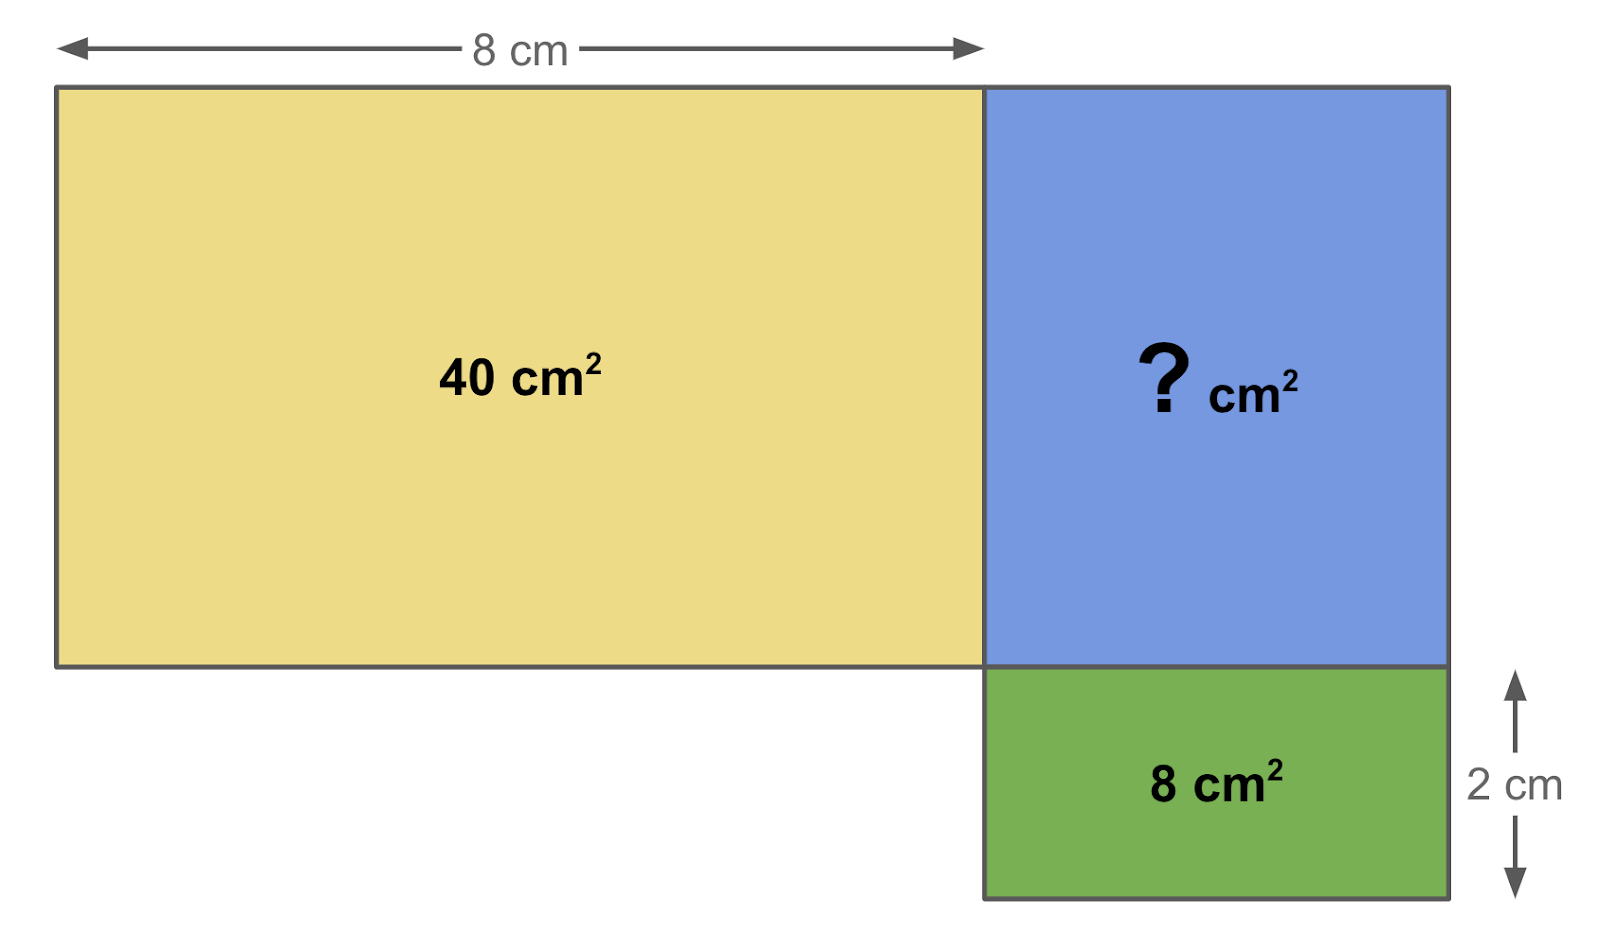 Three rectangles connected to form a rotated capital L shape. The largest, yellow rectangle has a labelled area of 40 square cm and a labelled length of 8 cm (connected to the side of the blue rectangle by an unknown width.) The smallest green rectangle has a labelled area of 8 square cm and a labelled width of 2 cm (connected to the bottom of the blue rectangle by an unknown length.) The blue rectangle is connected to the right side of the yellow rectangle and the top of the green rectangle. None of its side lengths are labelled, and its area is labelled with a question mark.